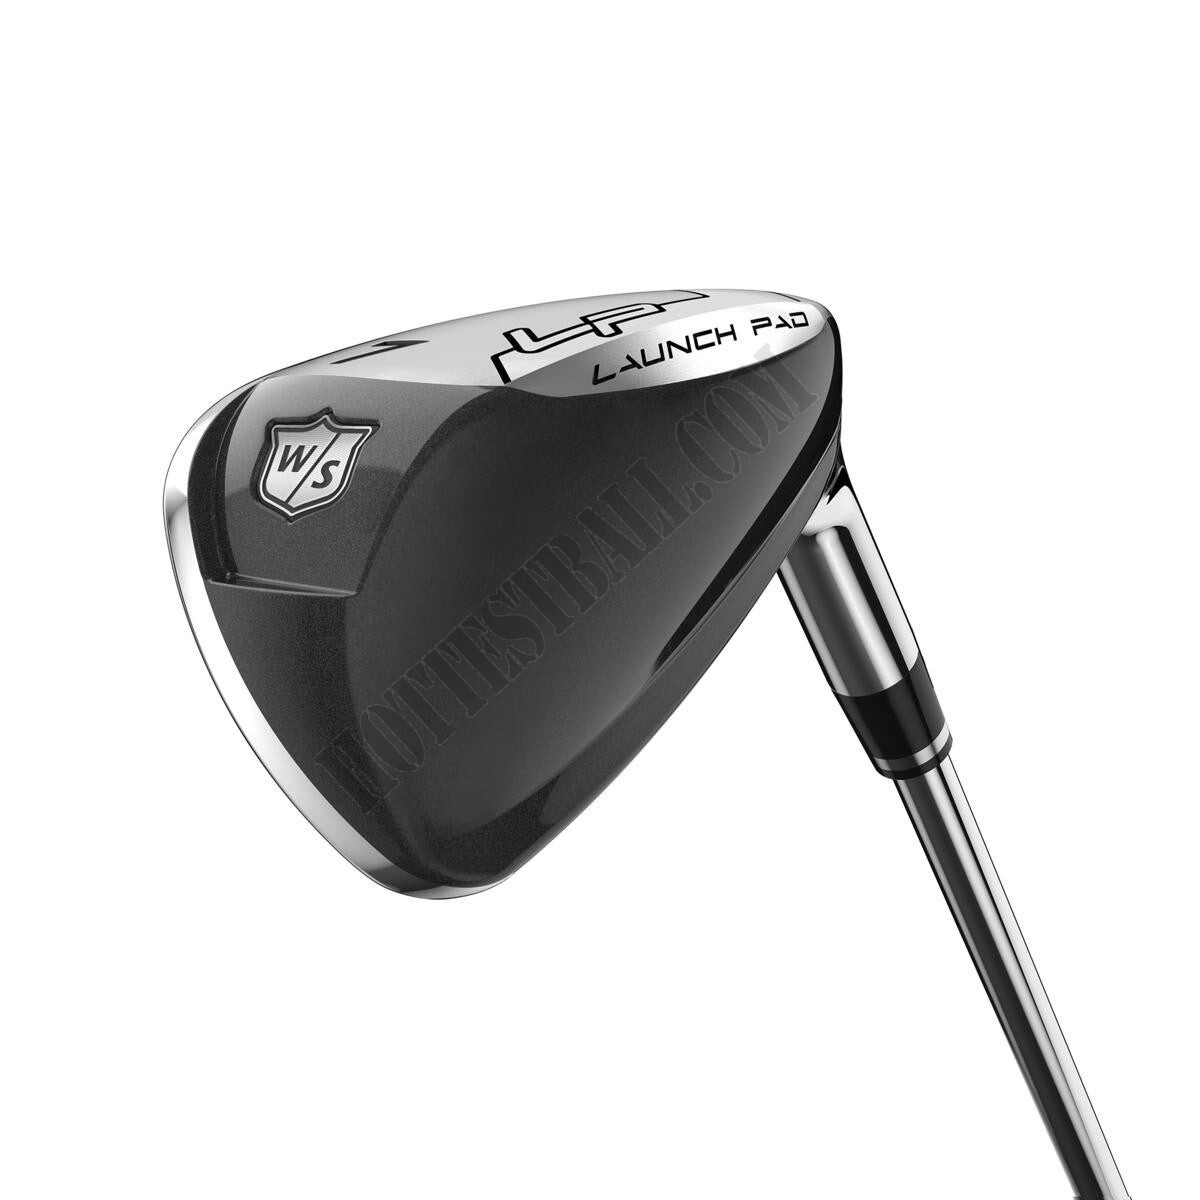 Launch Pad Irons - Steel (4-PW) - Wilson Discount Store - Launch Pad Irons - Steel (4-PW) - Wilson Discount Store